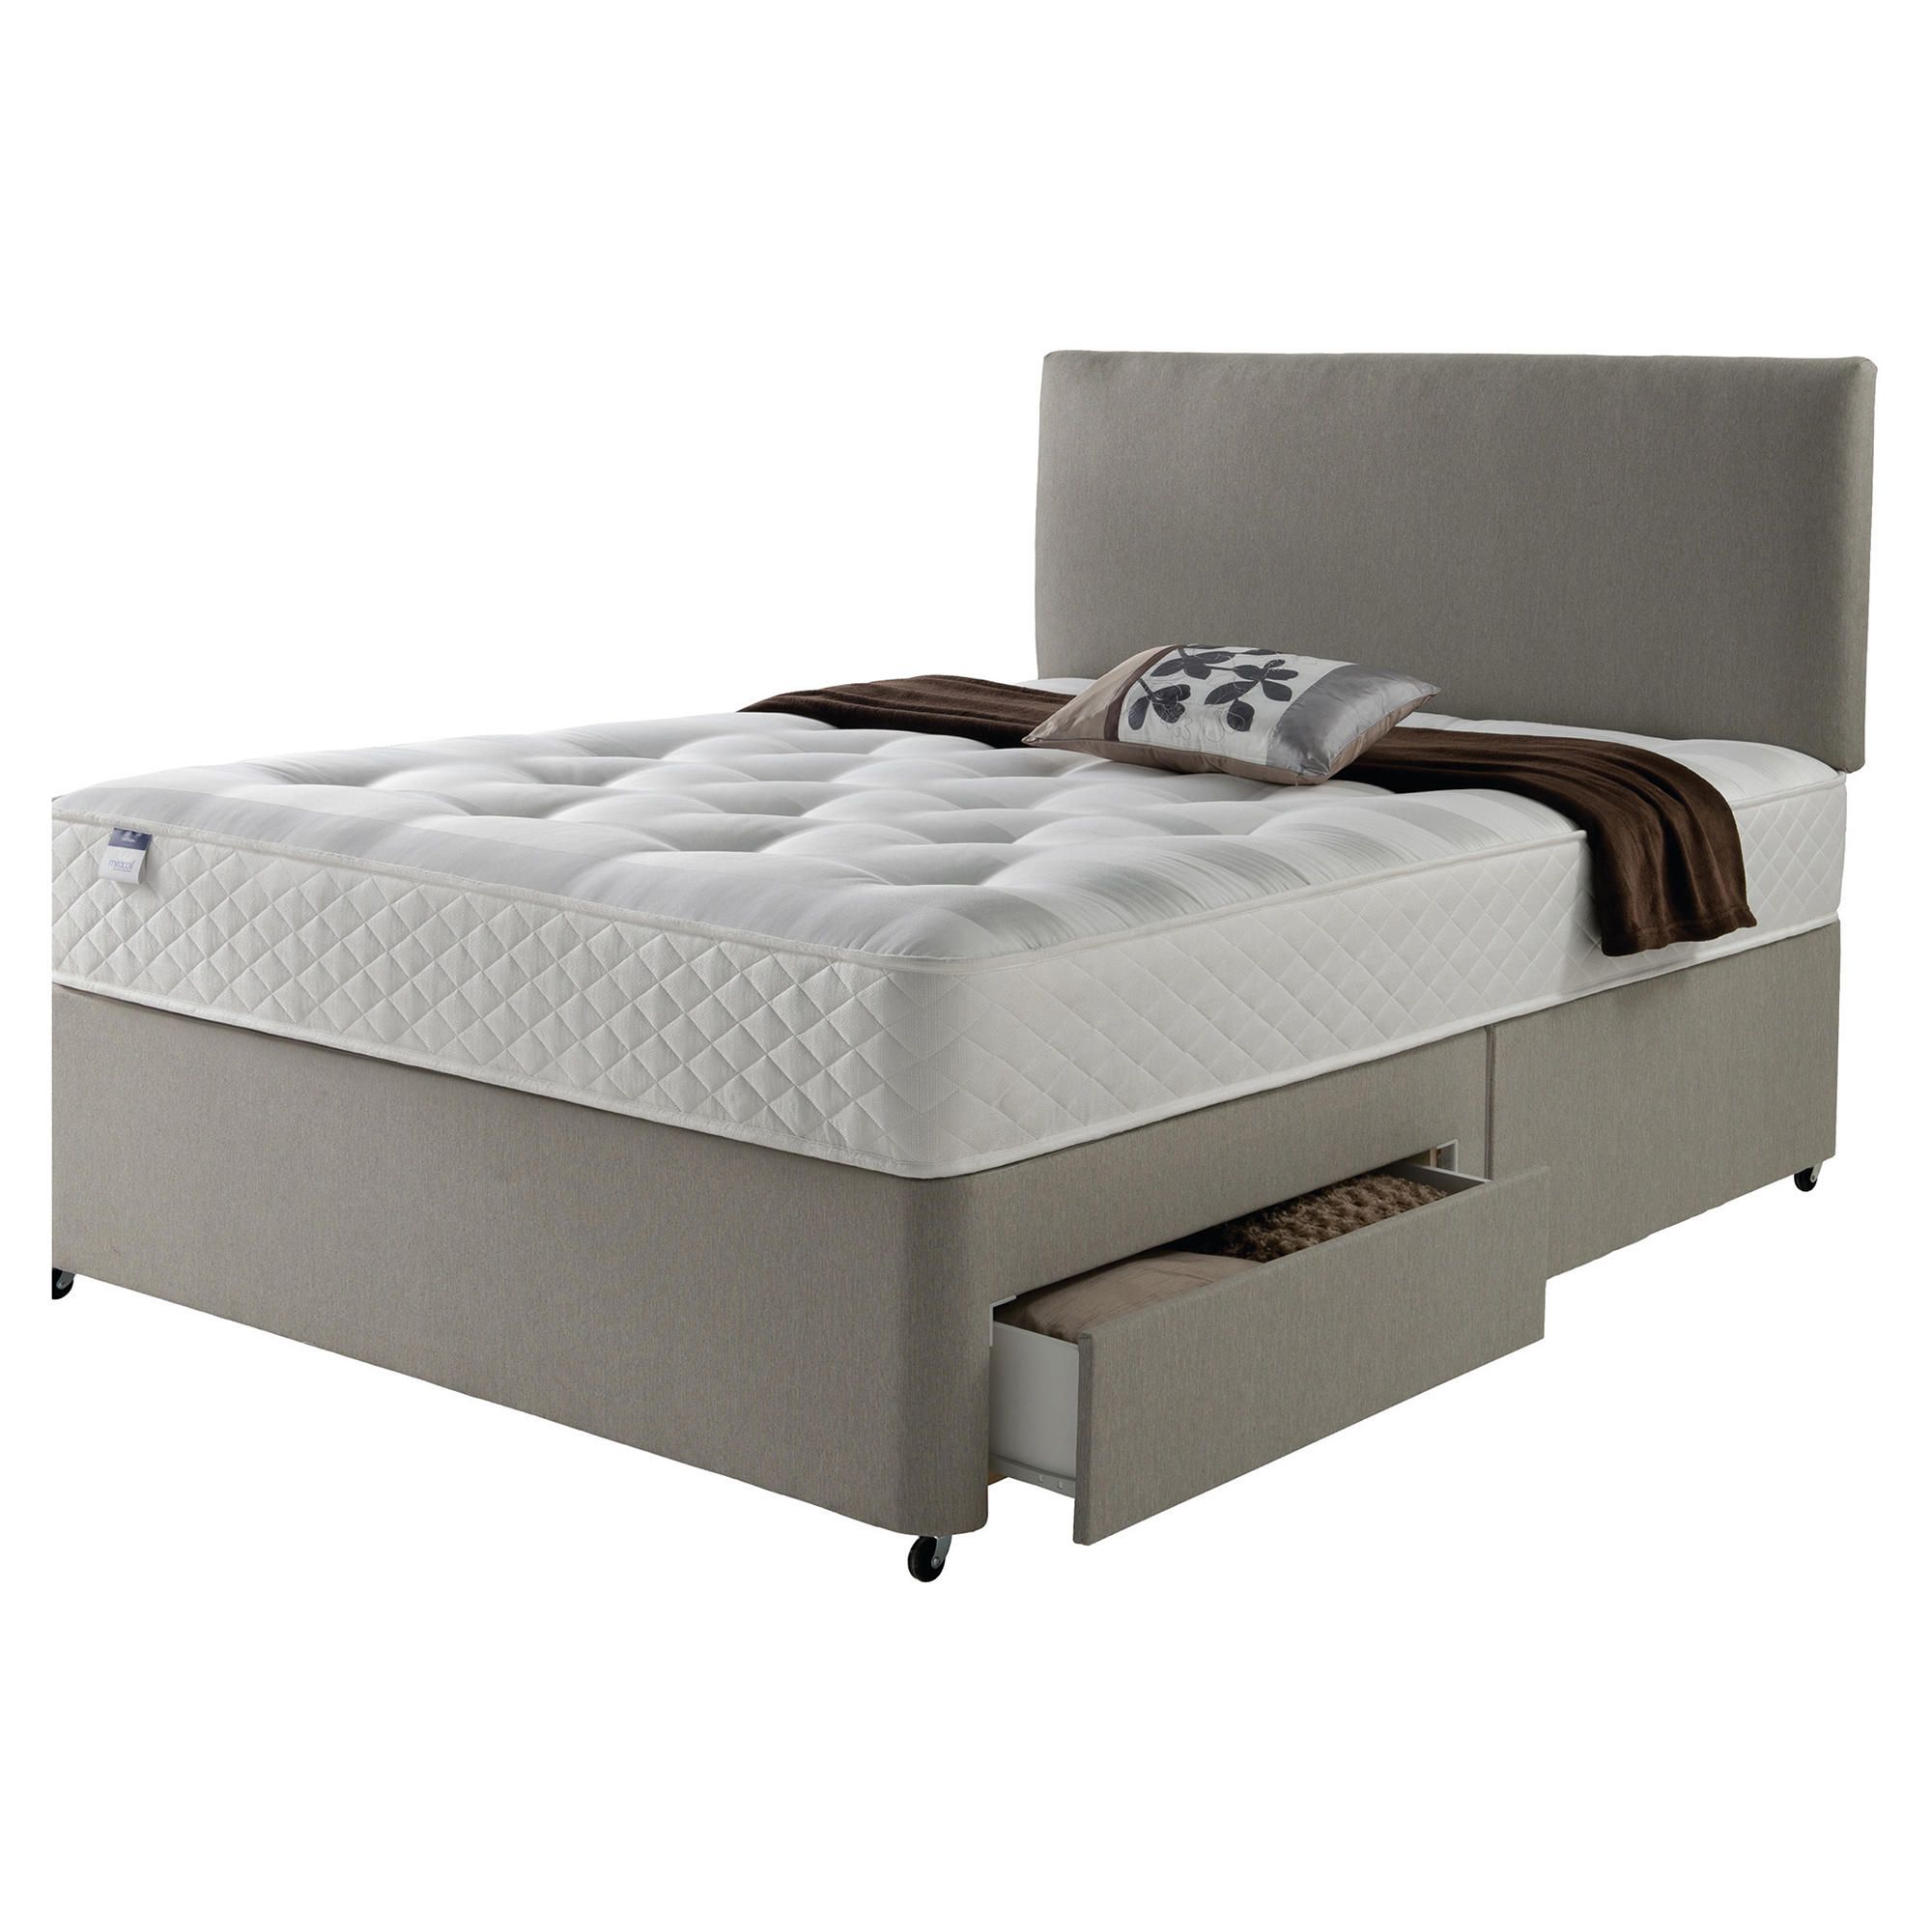 Silentnight Miracoil Luxury Ortho Tuft 4 Drawer Double Divan Mink no Headboard at Tesco Direct